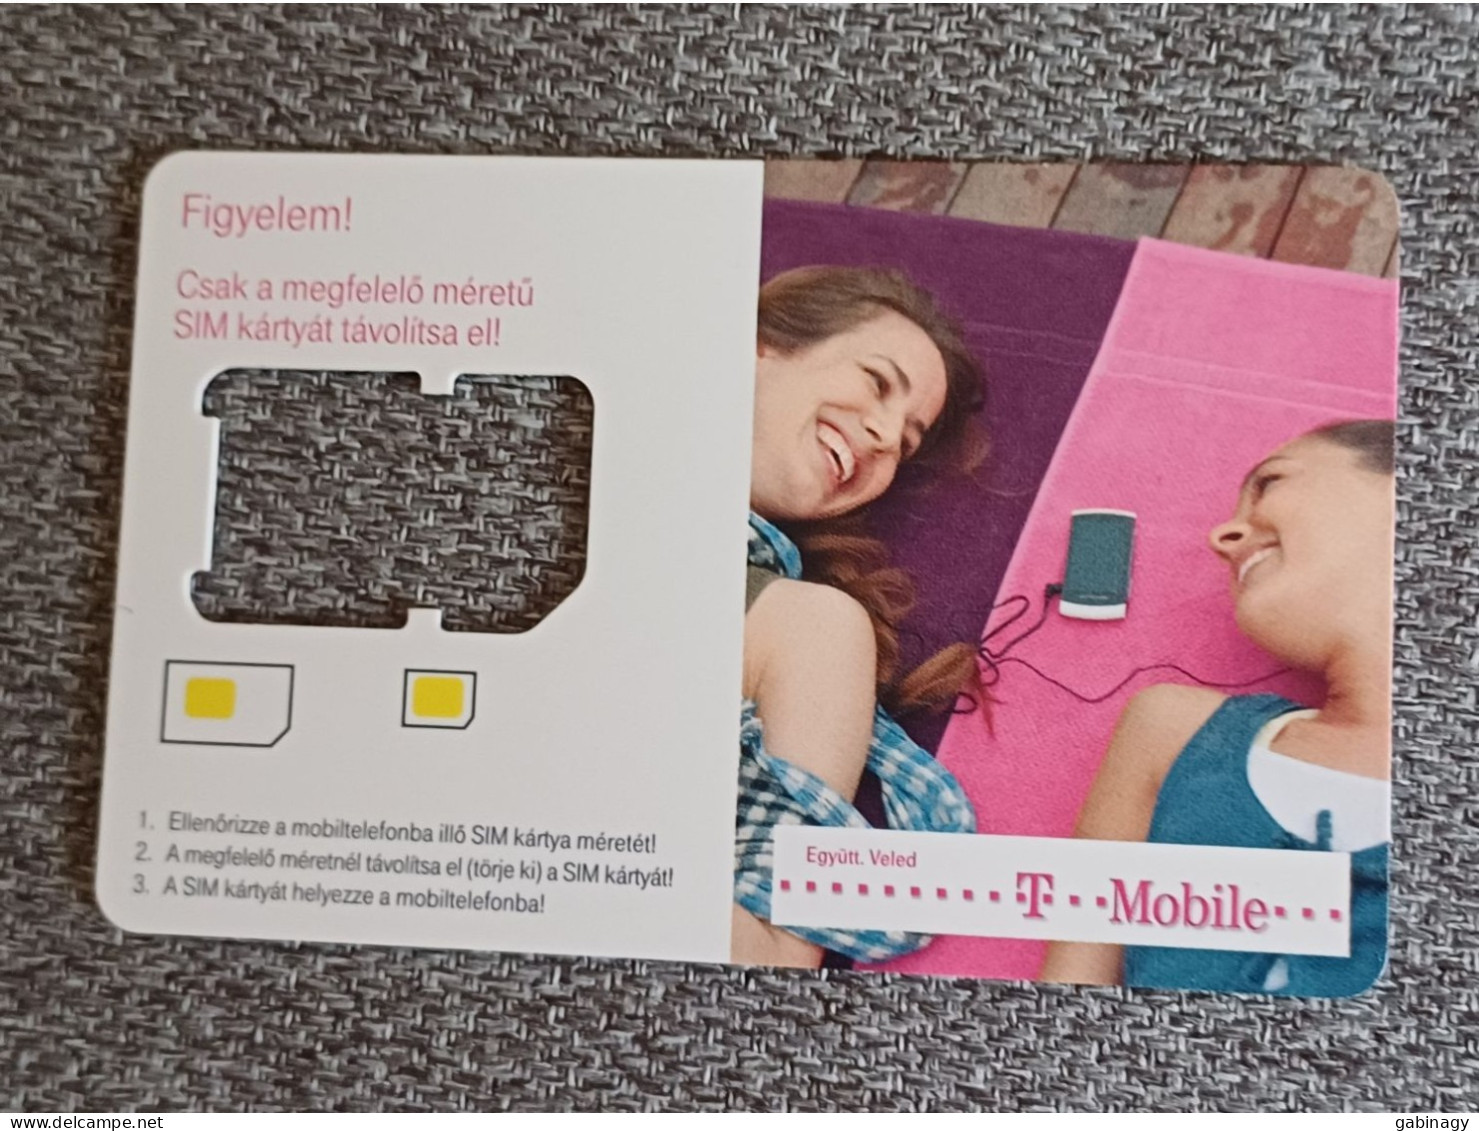 GSM - HUNGARY - T-MOBILE - PLUG-IN - WITHOUT SIM - Ungheria